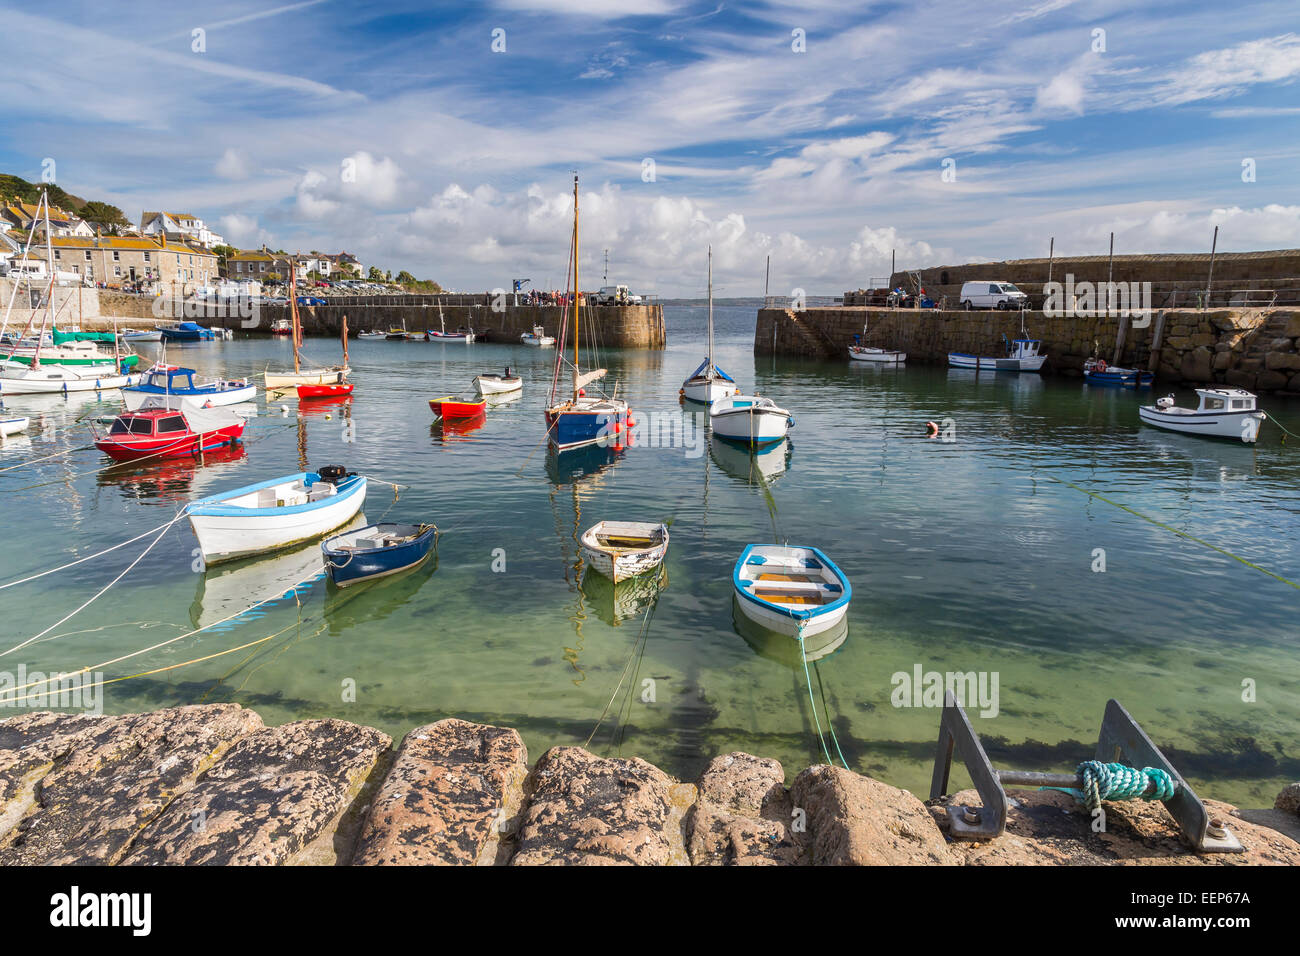 Beautiful summers day at Mousehole Harbour near Penzance Cornwall England UK Europe Stock Photo